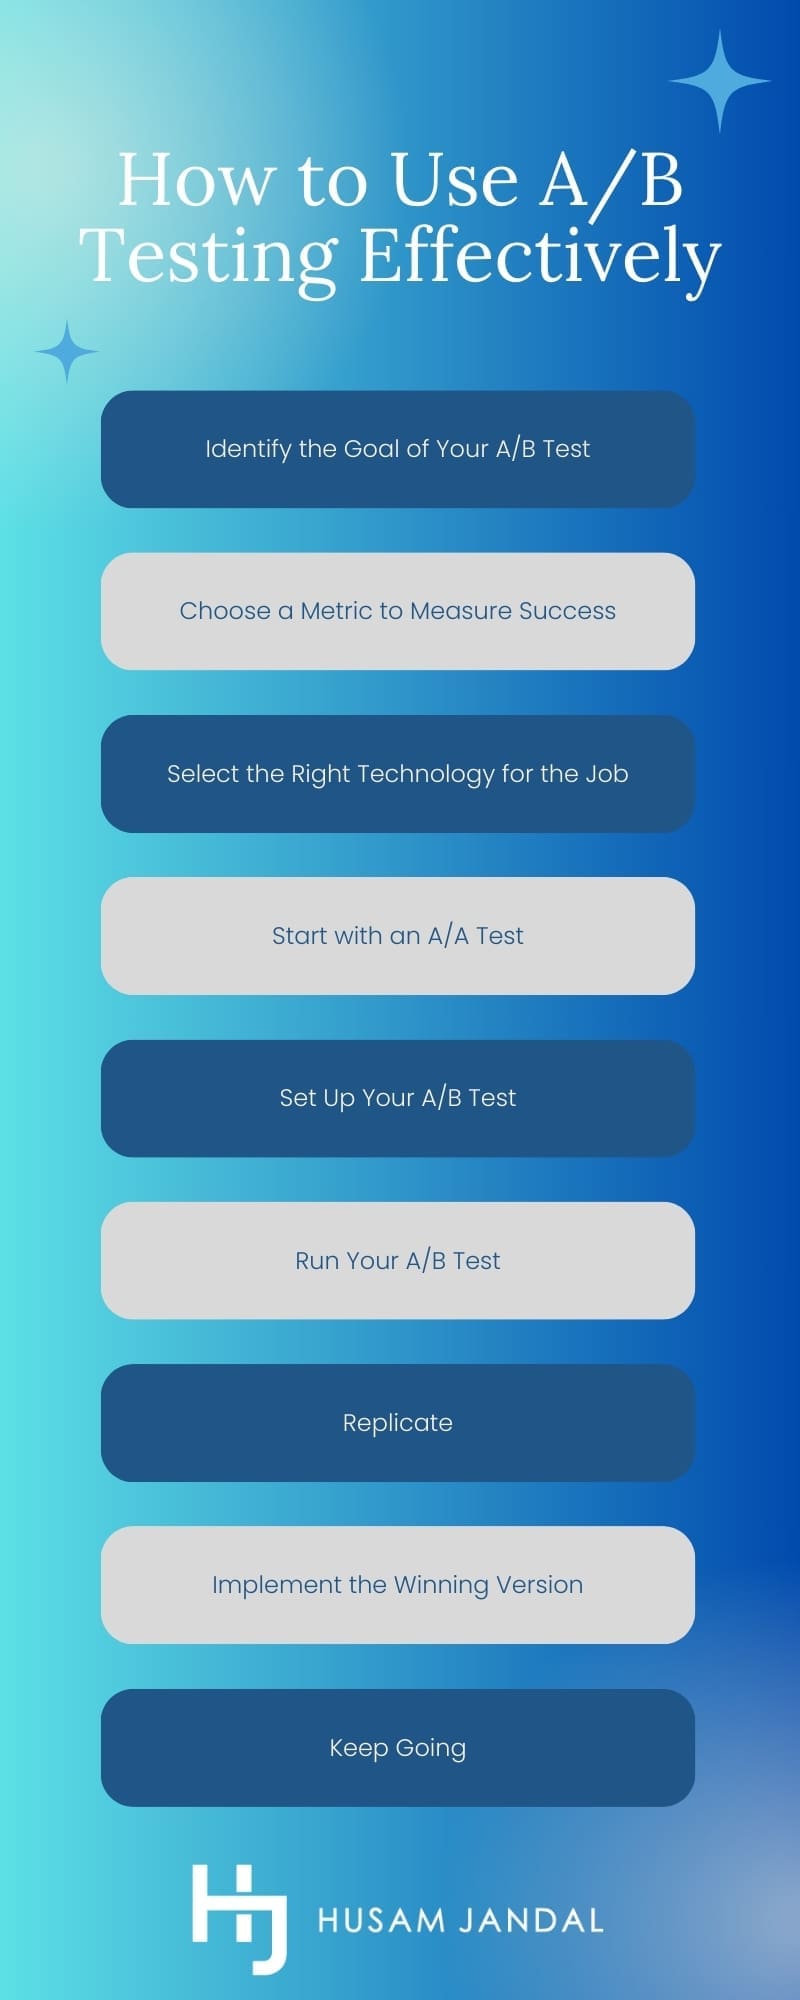 How to Use A/B Testing Effectively